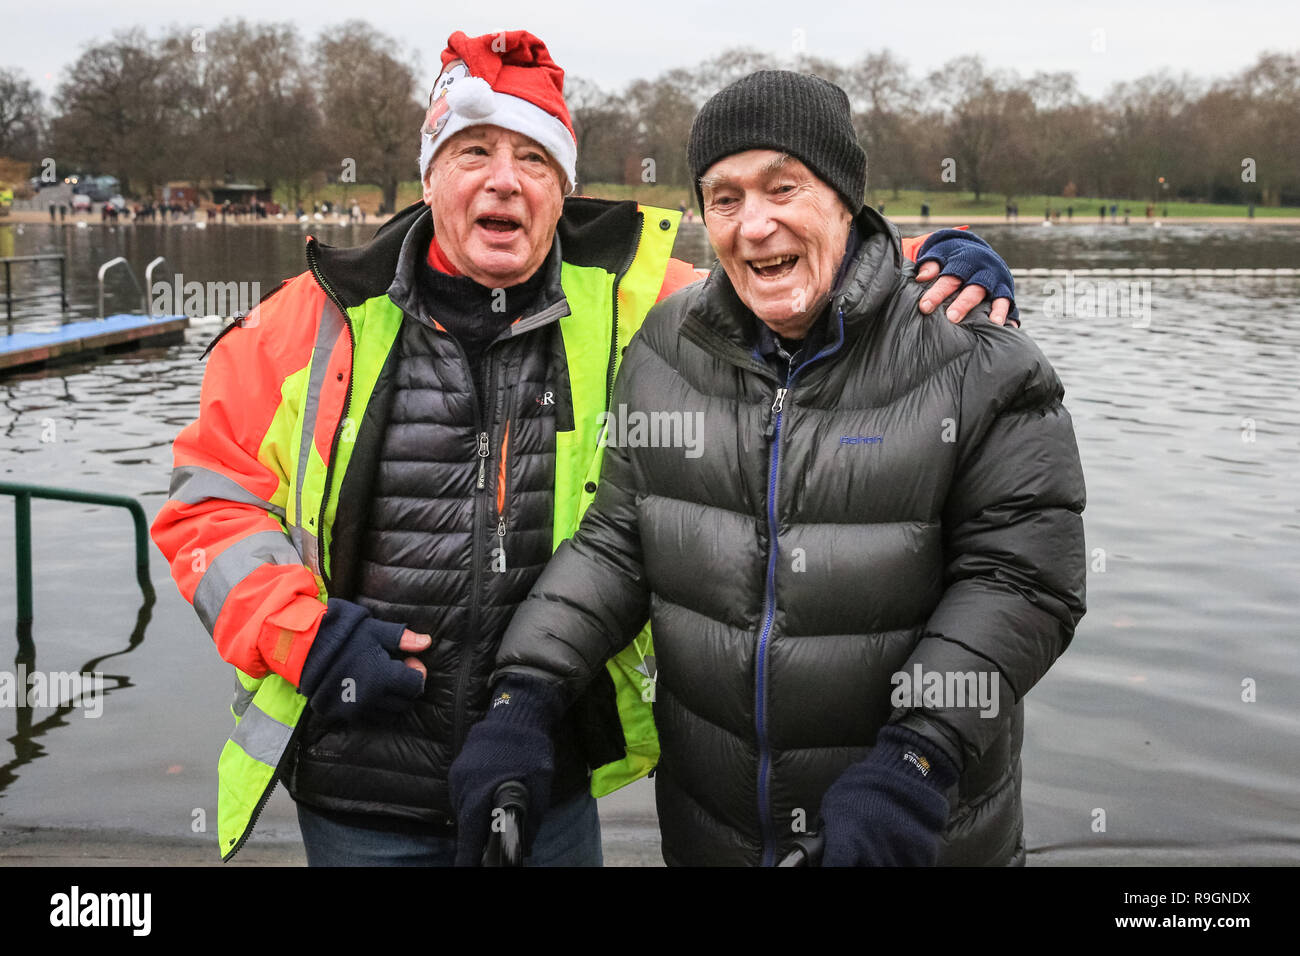 Hyde Park, London, 25th Dec 2018. The Serpentine Club President with the Club's oldest member, Alan Lacy, who is 95 and in good spirits. The 154th annual Christmas morning race for the 'Peter Pan Cup' gets under way at the Serpentine Swimming Club in London's Hyde Park. Swimmers brave the wintry weather and freezing cold open water of the Serpentine for the traditional event. Credit: Imageplotter News and Sports/Alamy Live News Stock Photo